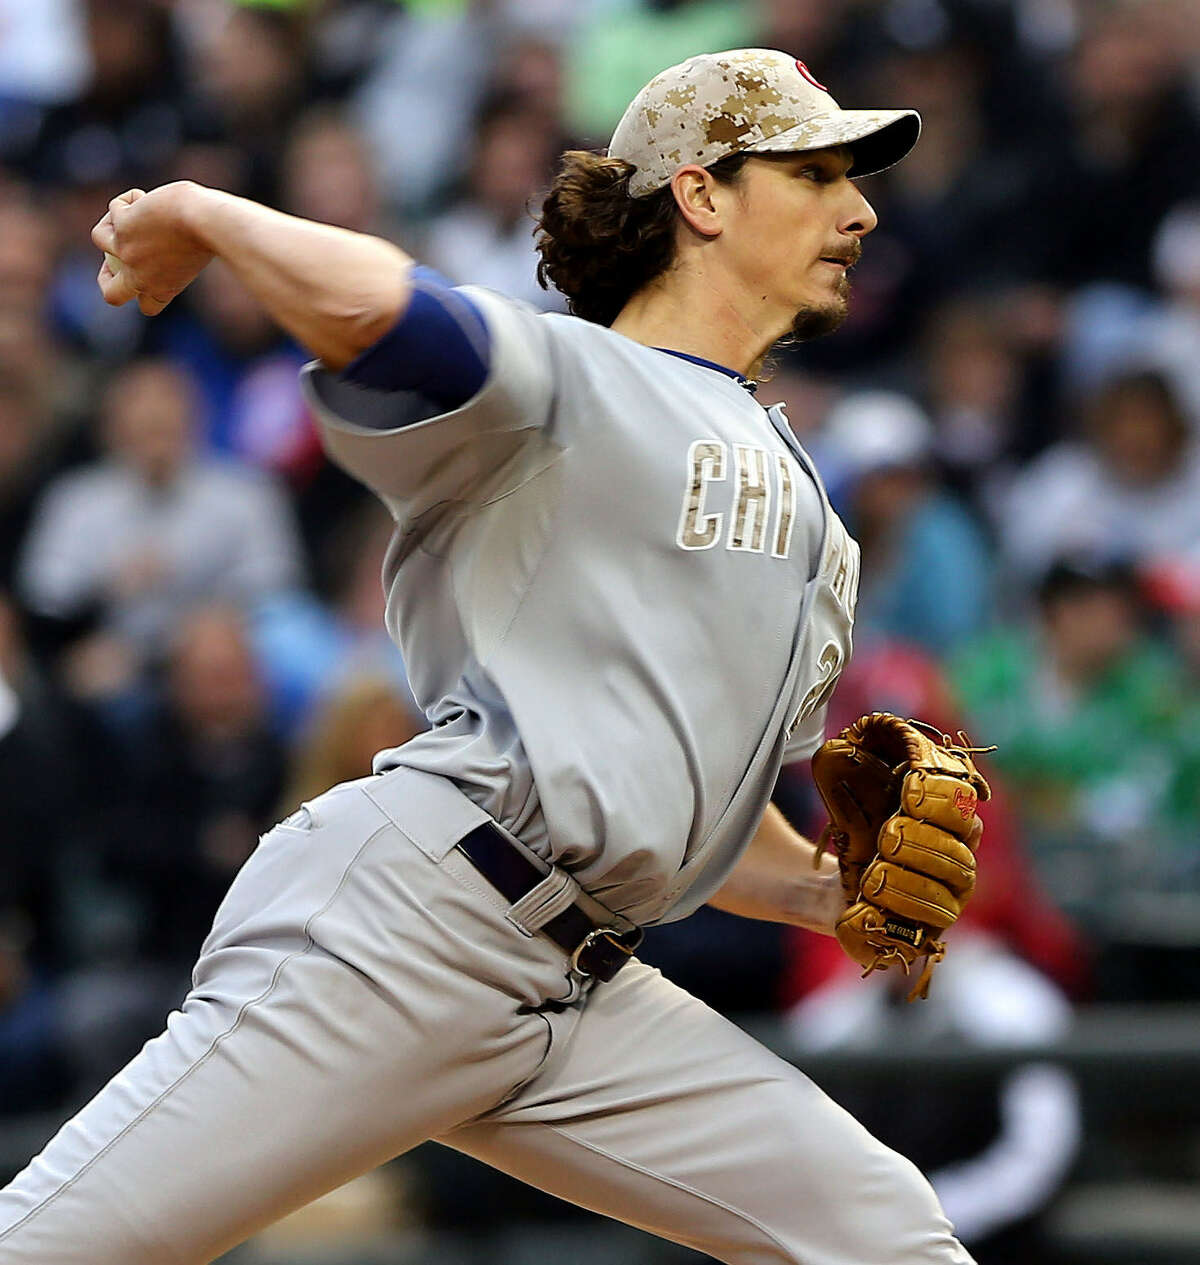 Cubs starter Jeff Samardzija, delivering in the first inning, tossed a two-hit shutout Monday.